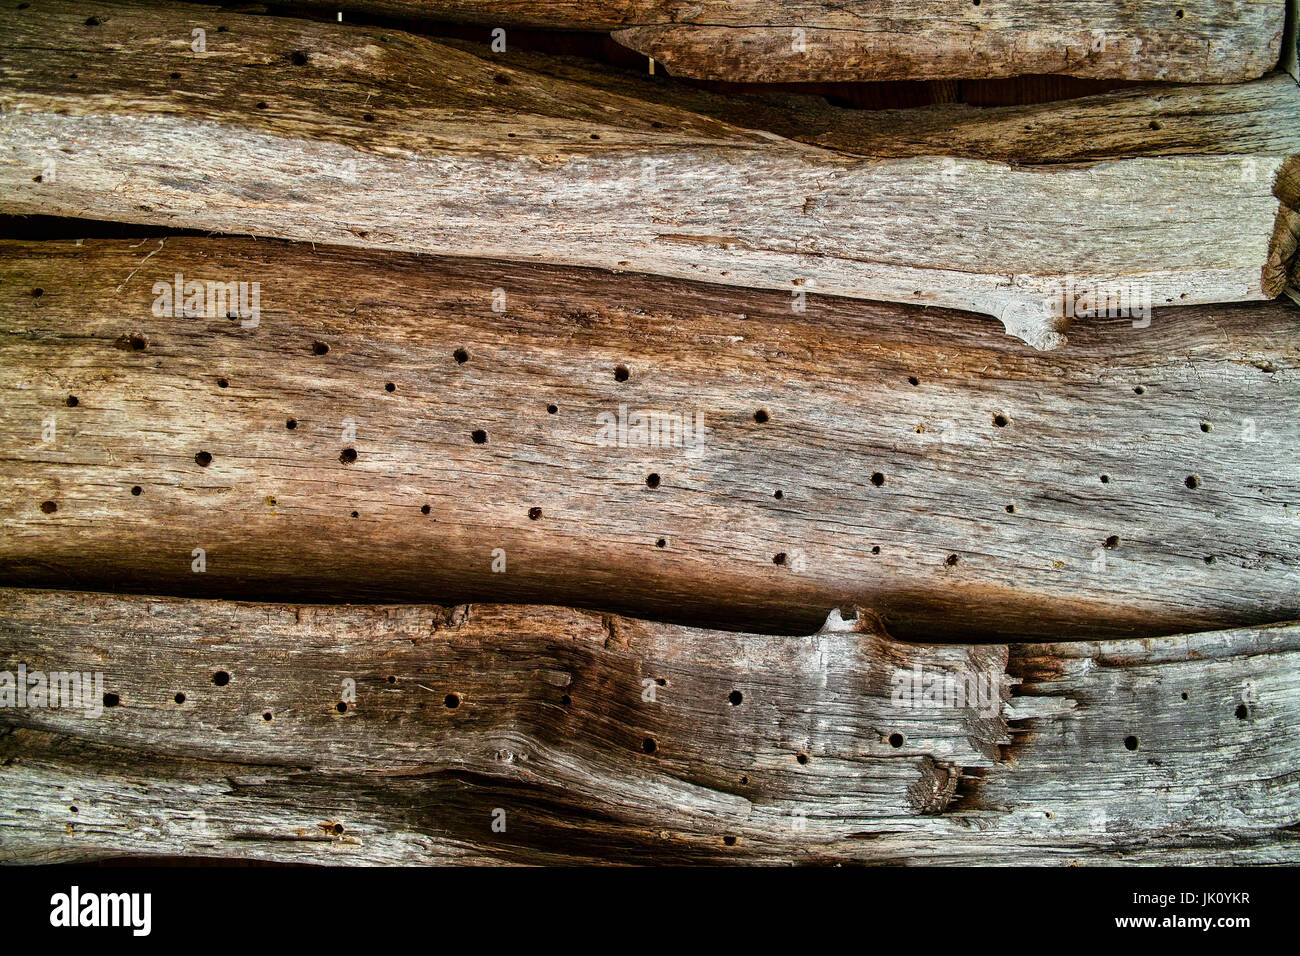 dead wood with bores as legehilfe lead insects. dead wood with holes, drilled for insects., totholz mit bohrloechern als legehilfe fuehr insekten. dea Stock Photo